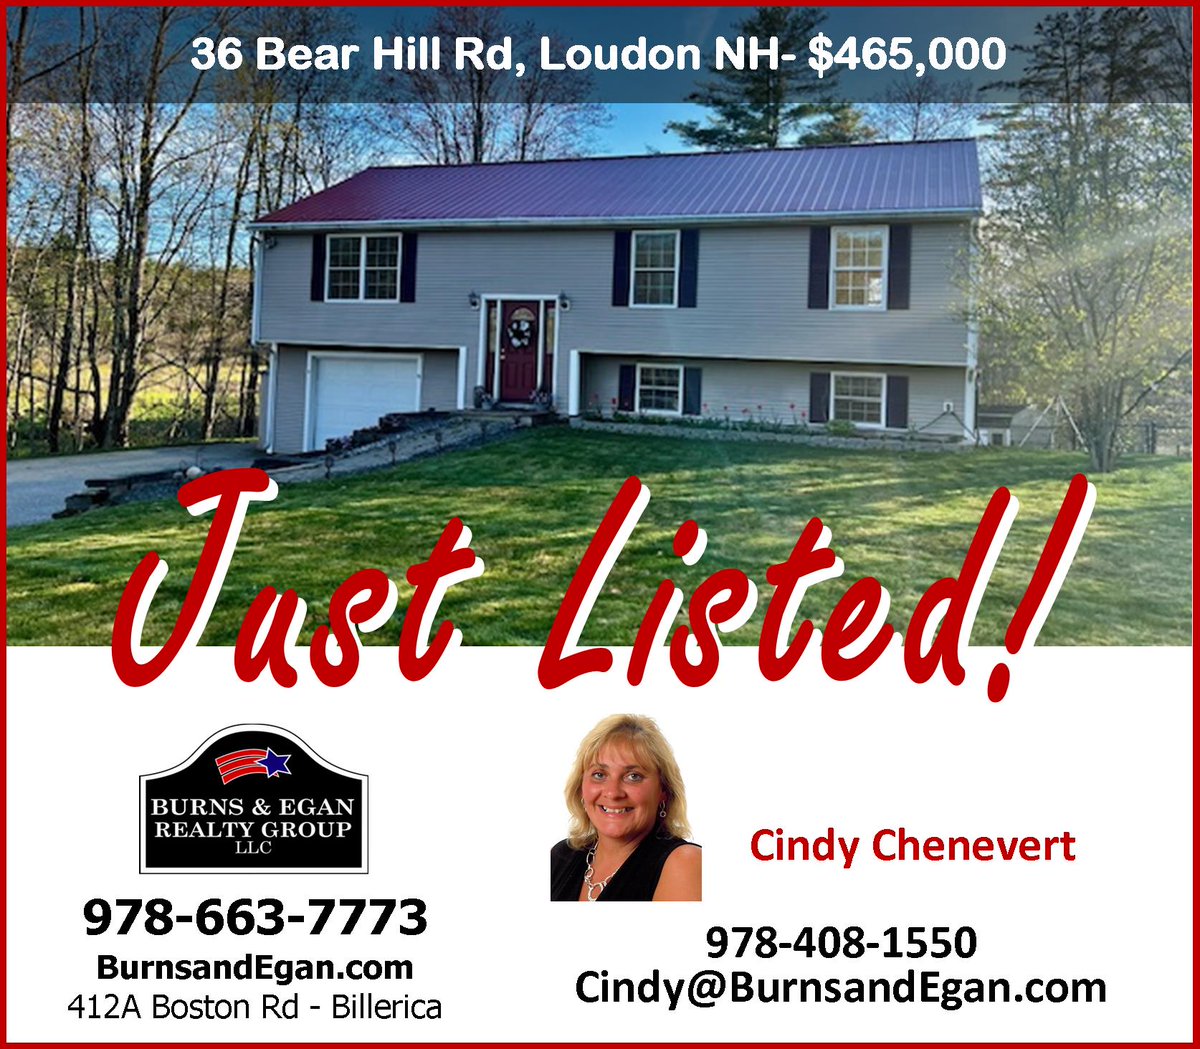 New To The Loudon NH Market

#LoudonNHrealestate #Loudonrealestate #LoudonNH  #realestatemarket #justlisted #LoudonNHhomes #homesforsale #homeownership #realestate #burnsandegan #dreamhome #forsale #househunting #homes #newhome #house